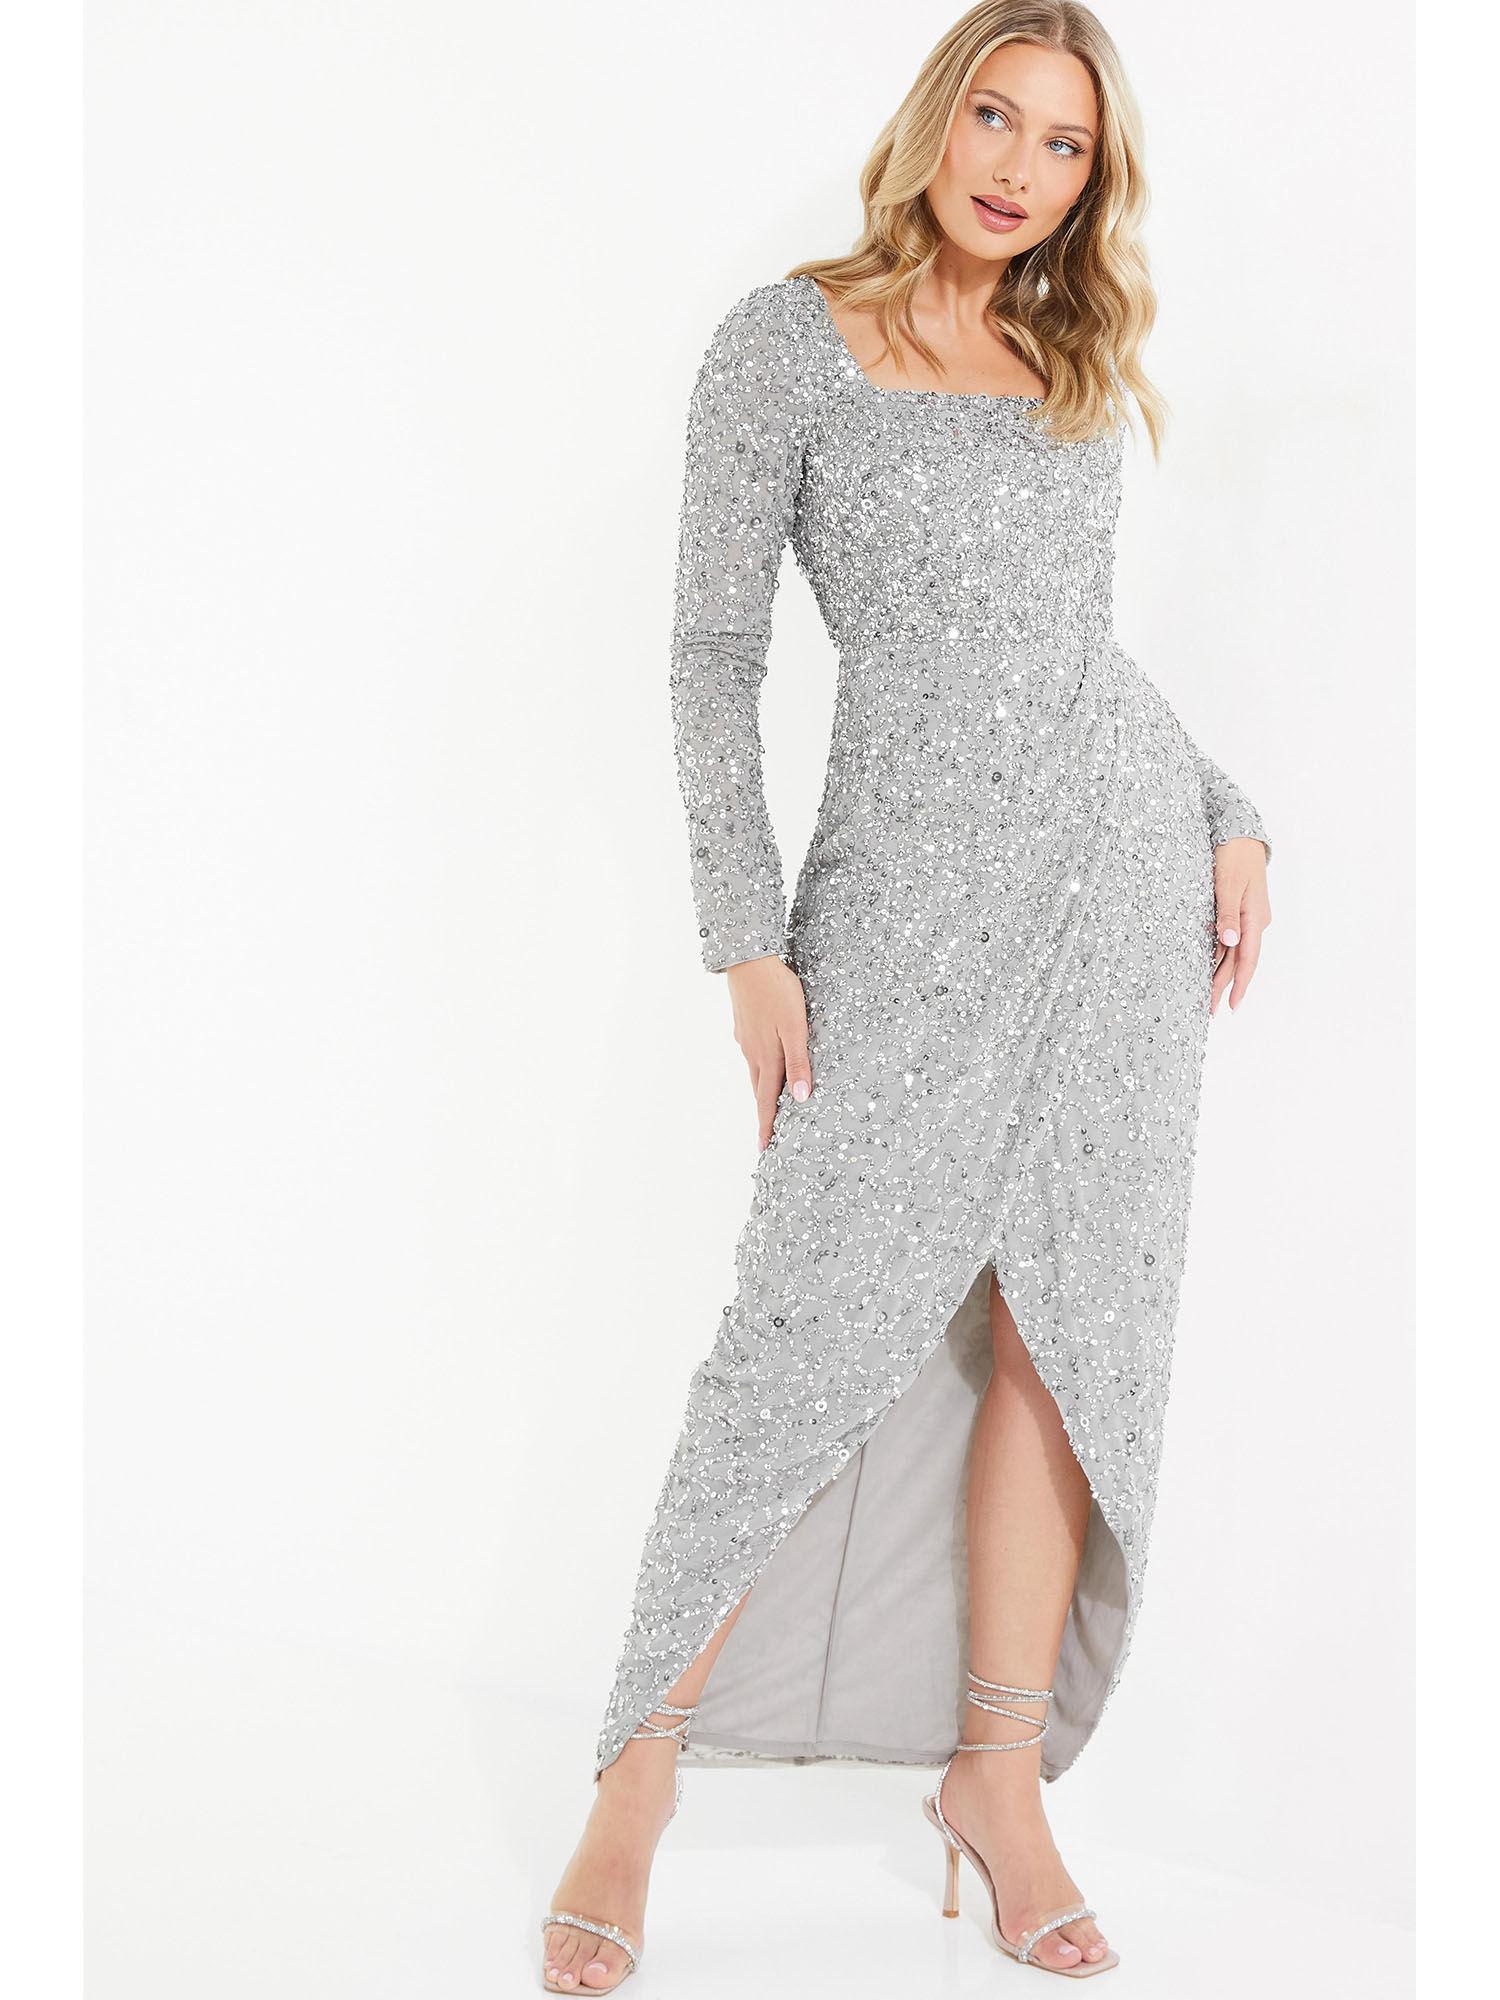 grey sequin midi dress with long sleeves & square neck wrap design